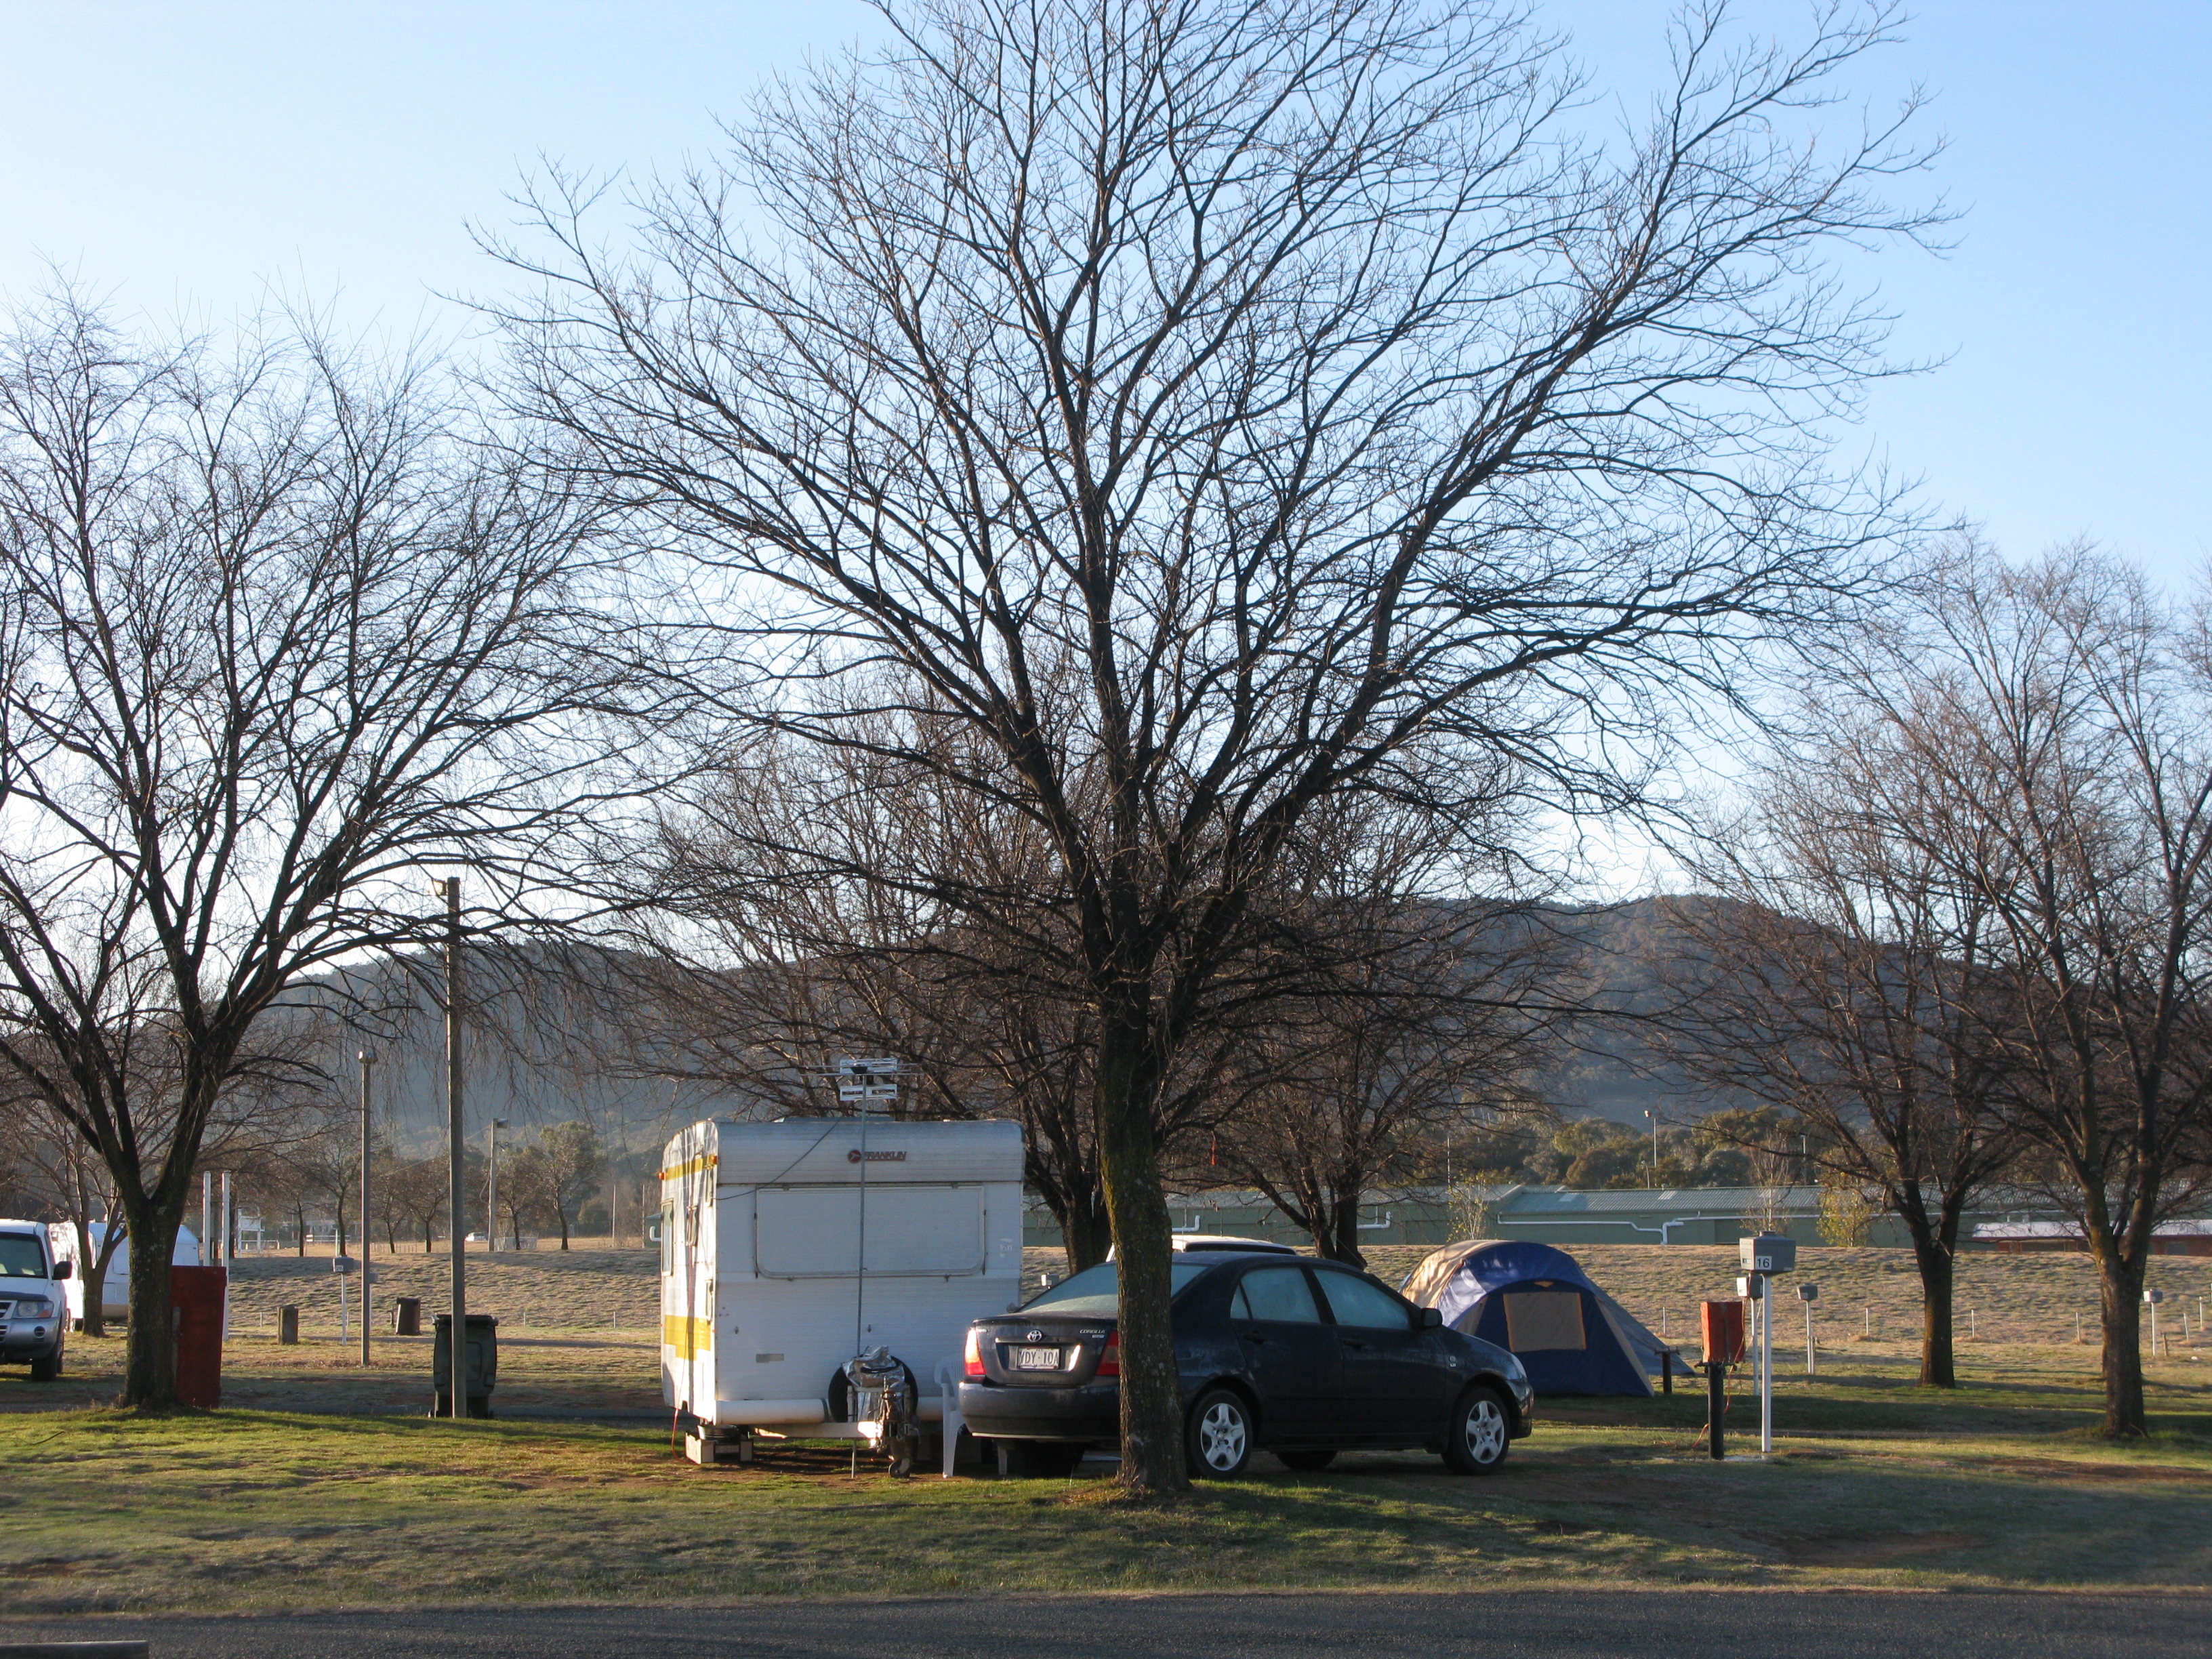 Exhibition Park In Canberra (EPIC) - Mitchell: Powered sites for caravans with distant hills adding to the attractive landscape.